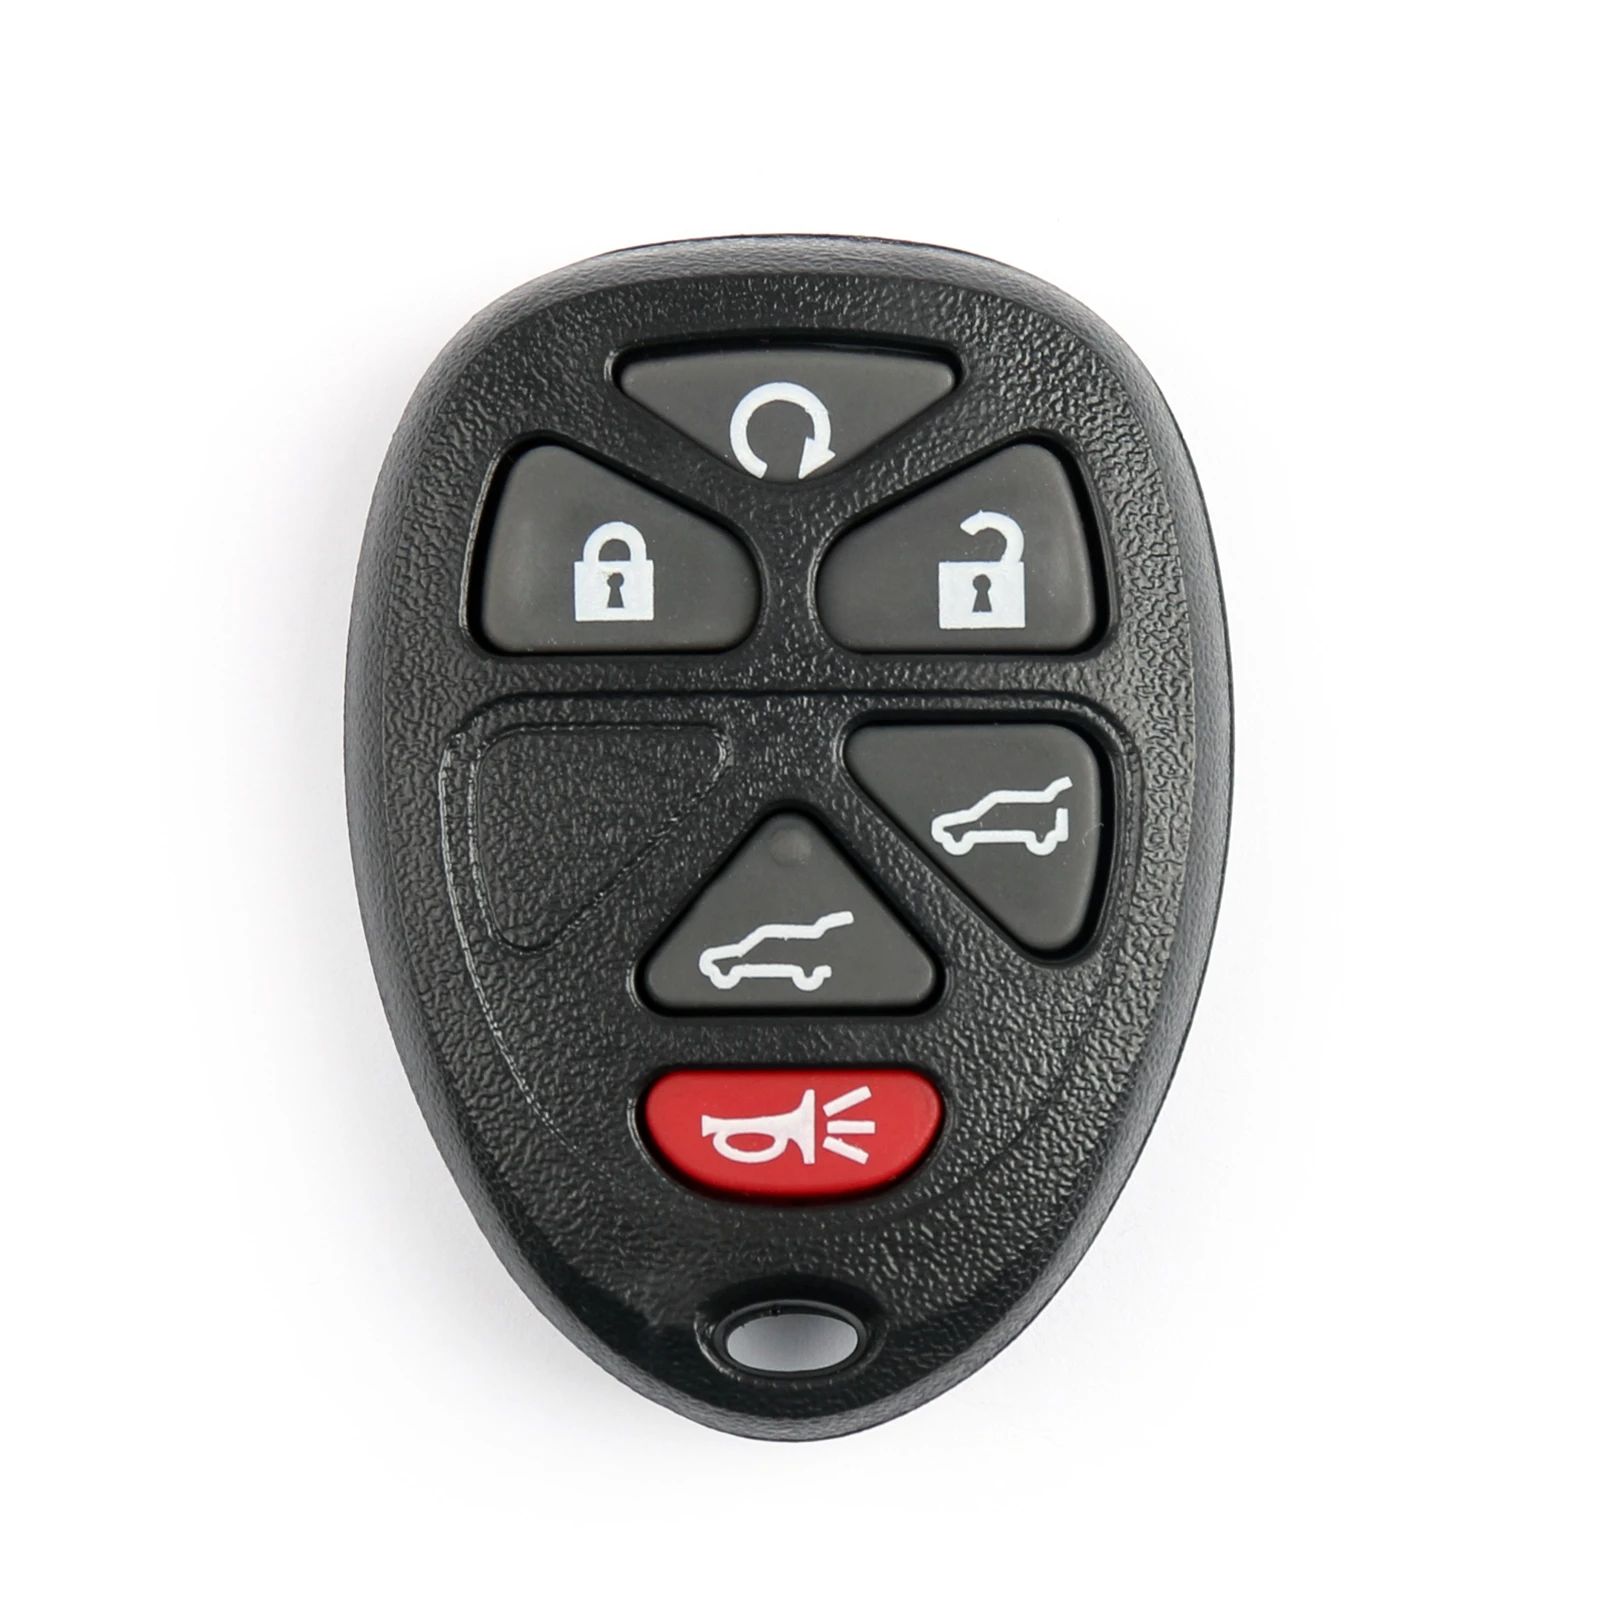 

Areyourshop 6 Button Remote Keyless Key Fob Case Shell For GMC Yukon for Chevy Suburban Tahoe